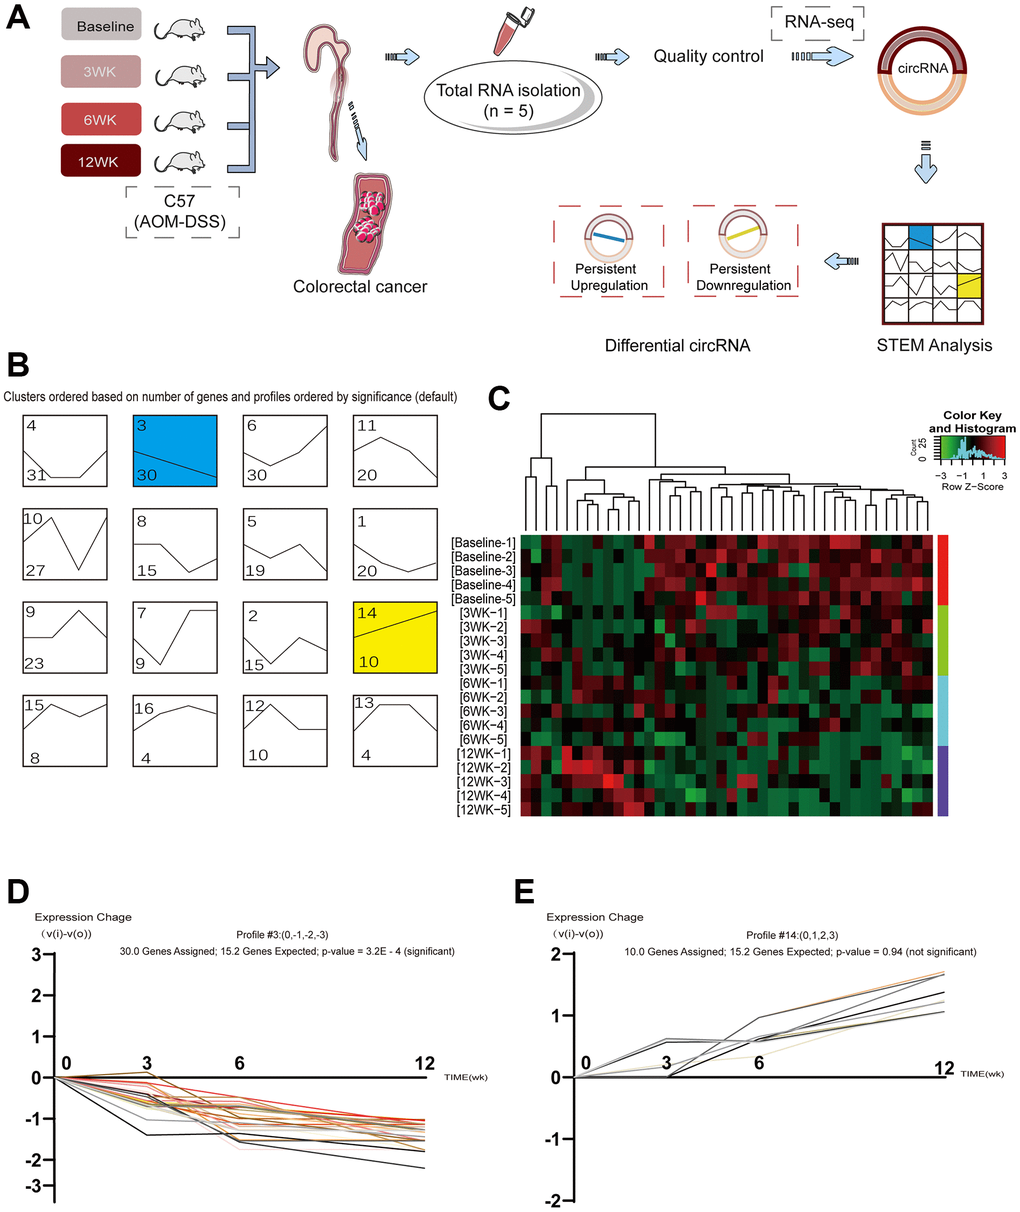 Identification of circular RNAs expressed at different stages in inflammation-based tumorigenesis. (A) Schematic representation of circRNA identification and sequencing; (B) Cluster based on changes in circRNA; (C) Heatmap of the clustering analysis indicating differences in circRNA expression profiles in the stage of “inflammation-CRA-CRC”. Areas colored red and green indicate the upregulation and downregulation of circRNA, respectively; (D) circRNAs with persistent downregulation; (E) circRNAs with persistent upregulation.